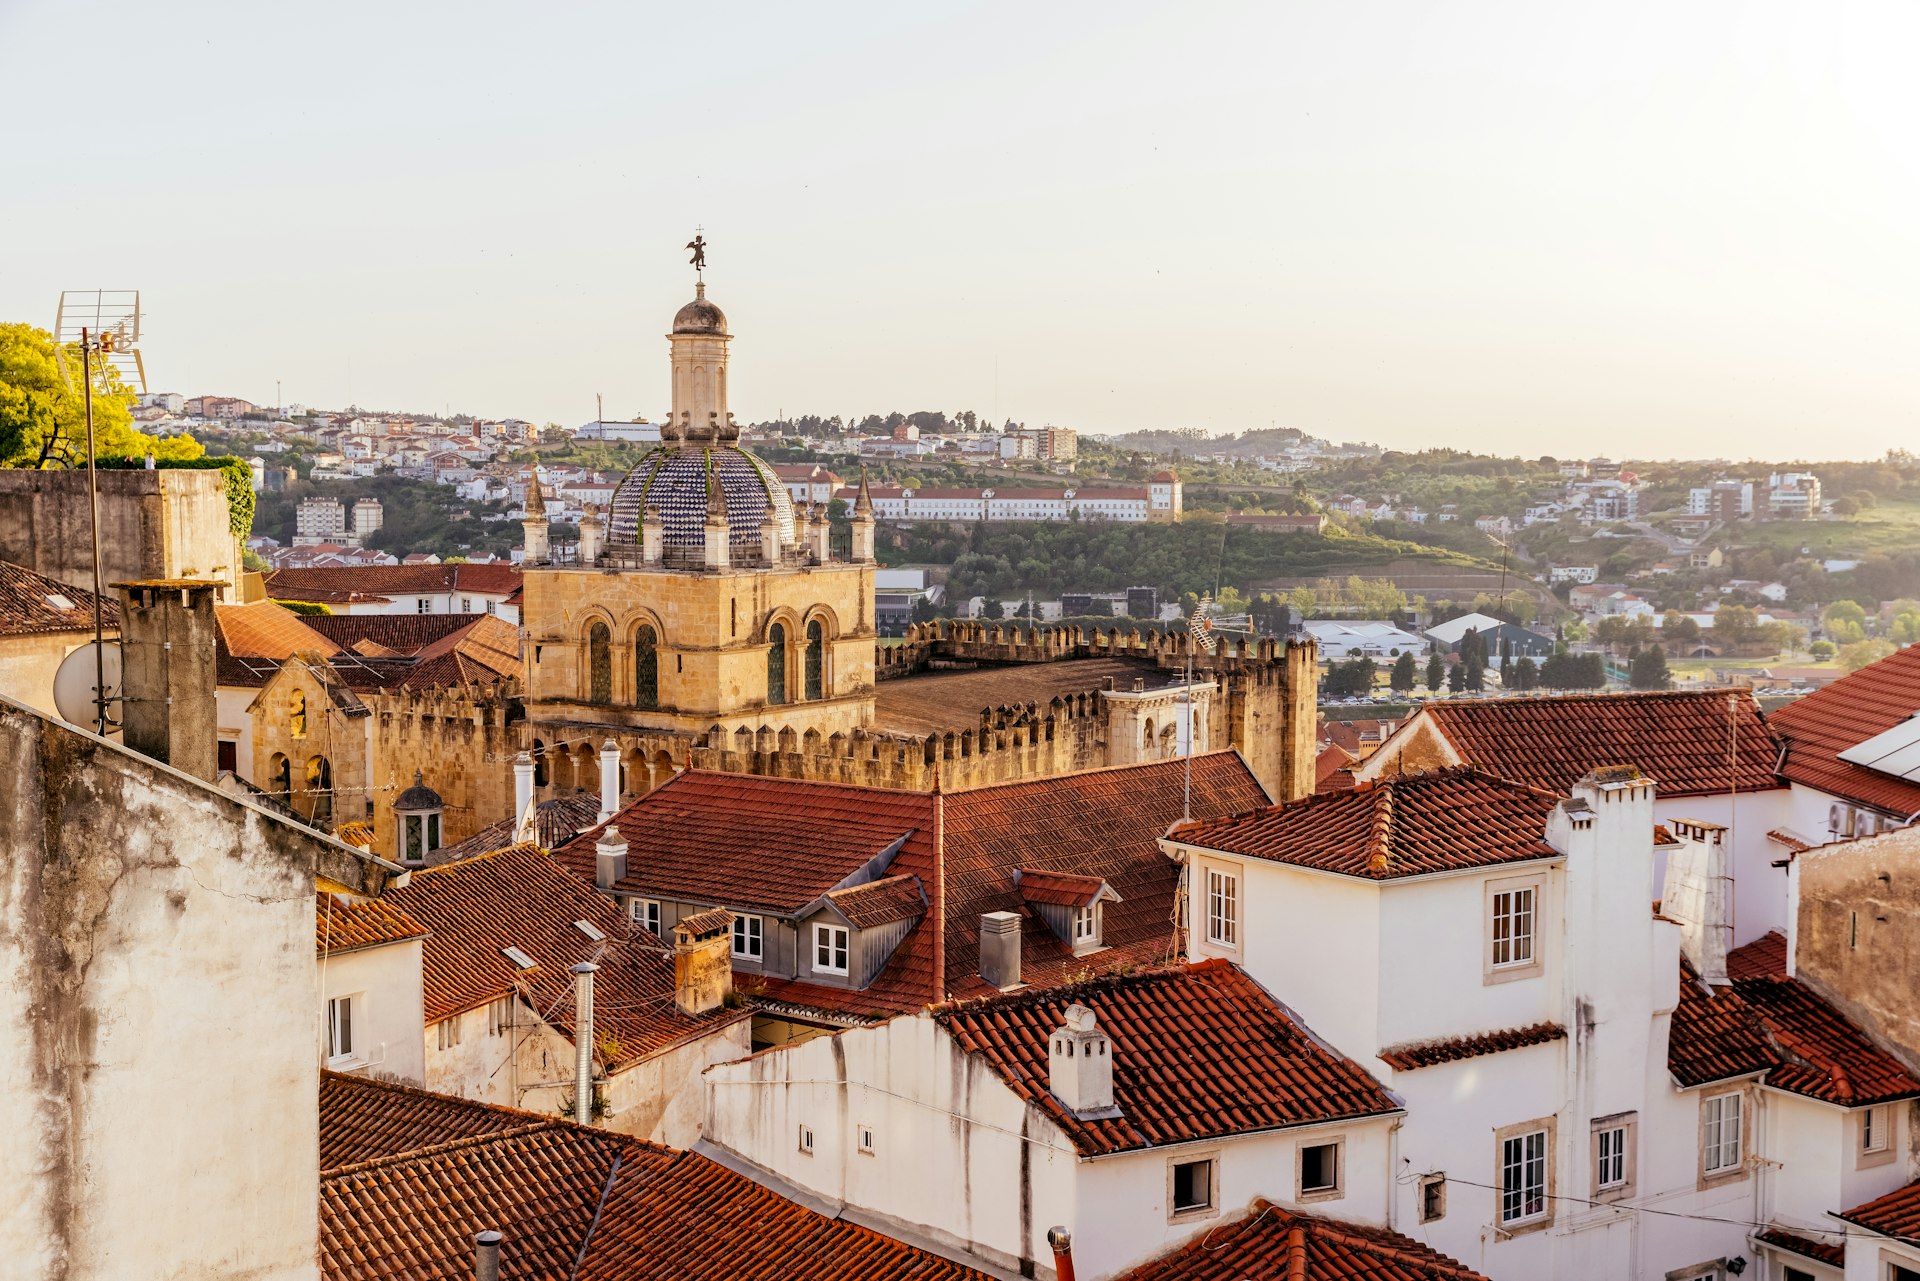 The Coimbra city skyline with the tower of the Old Cathedral of Coimbra, in the center